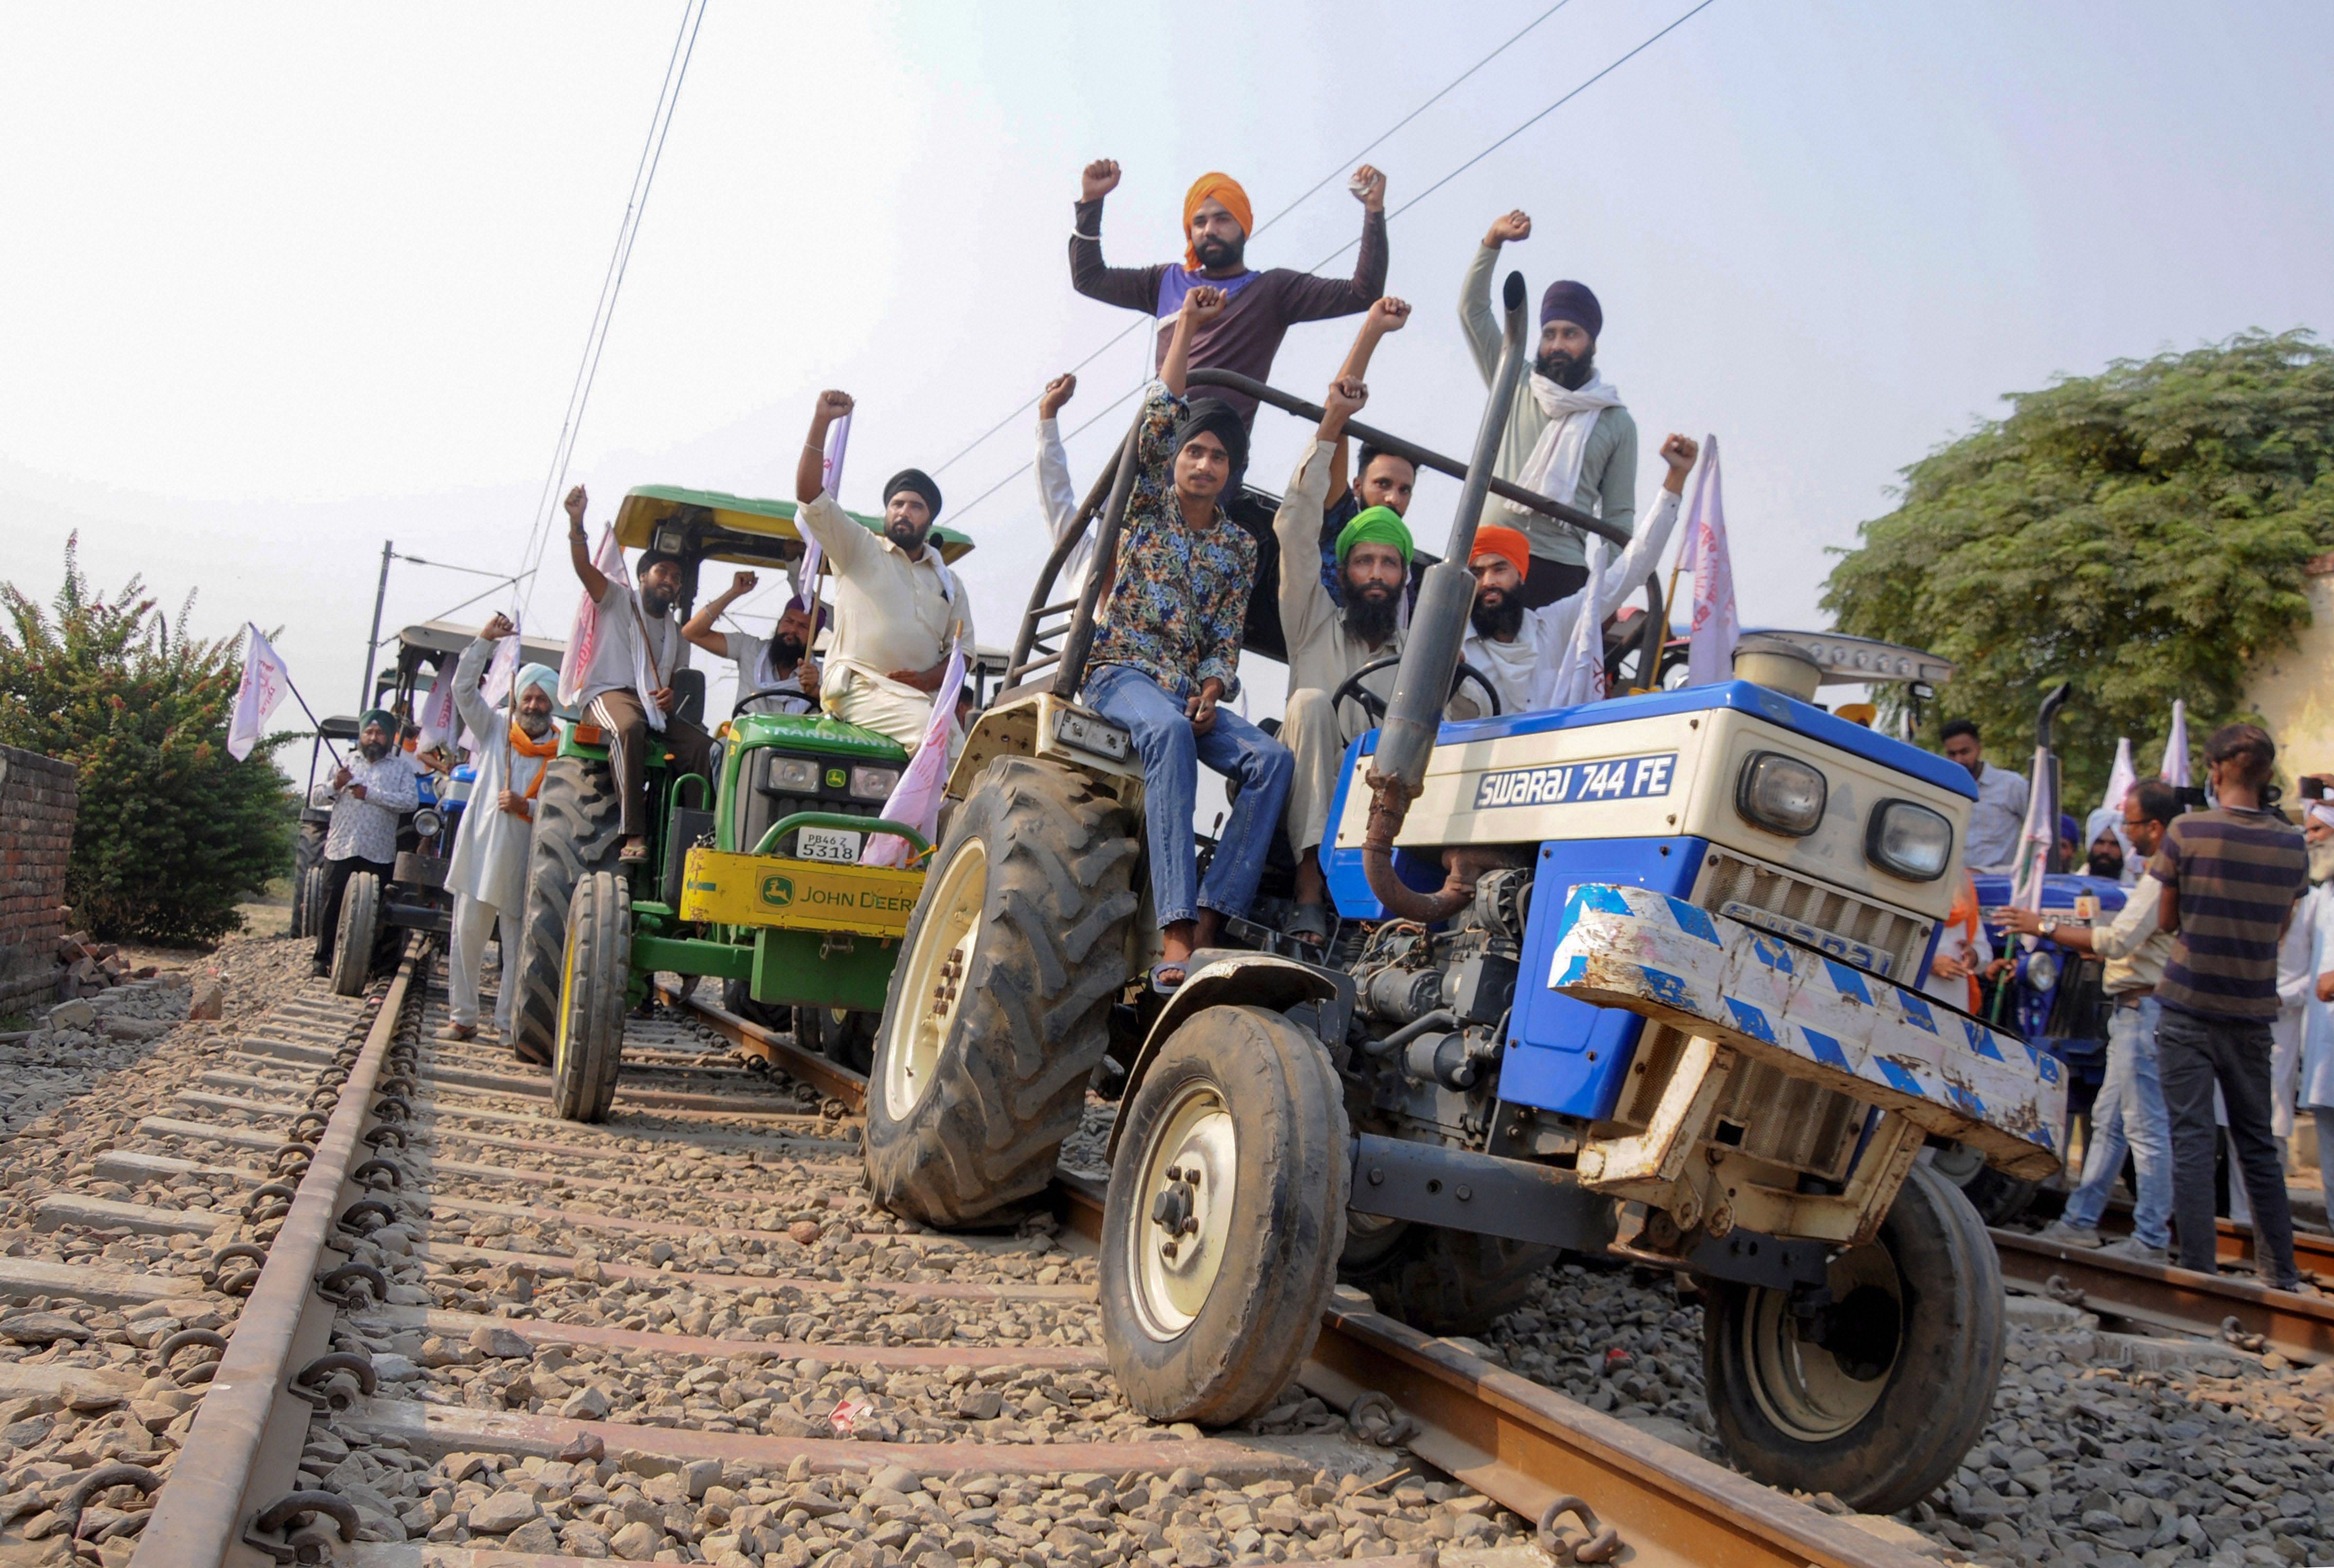 Farmers raise slogans as they block train tracks with tractors on the twentieth day of their ongoing 'Rail Roko' protest over recent farm reform bills, at Devi Dass Pura village in Amritsar, Tuesday, Oct. 13, 2020. Credit: PTI Photo